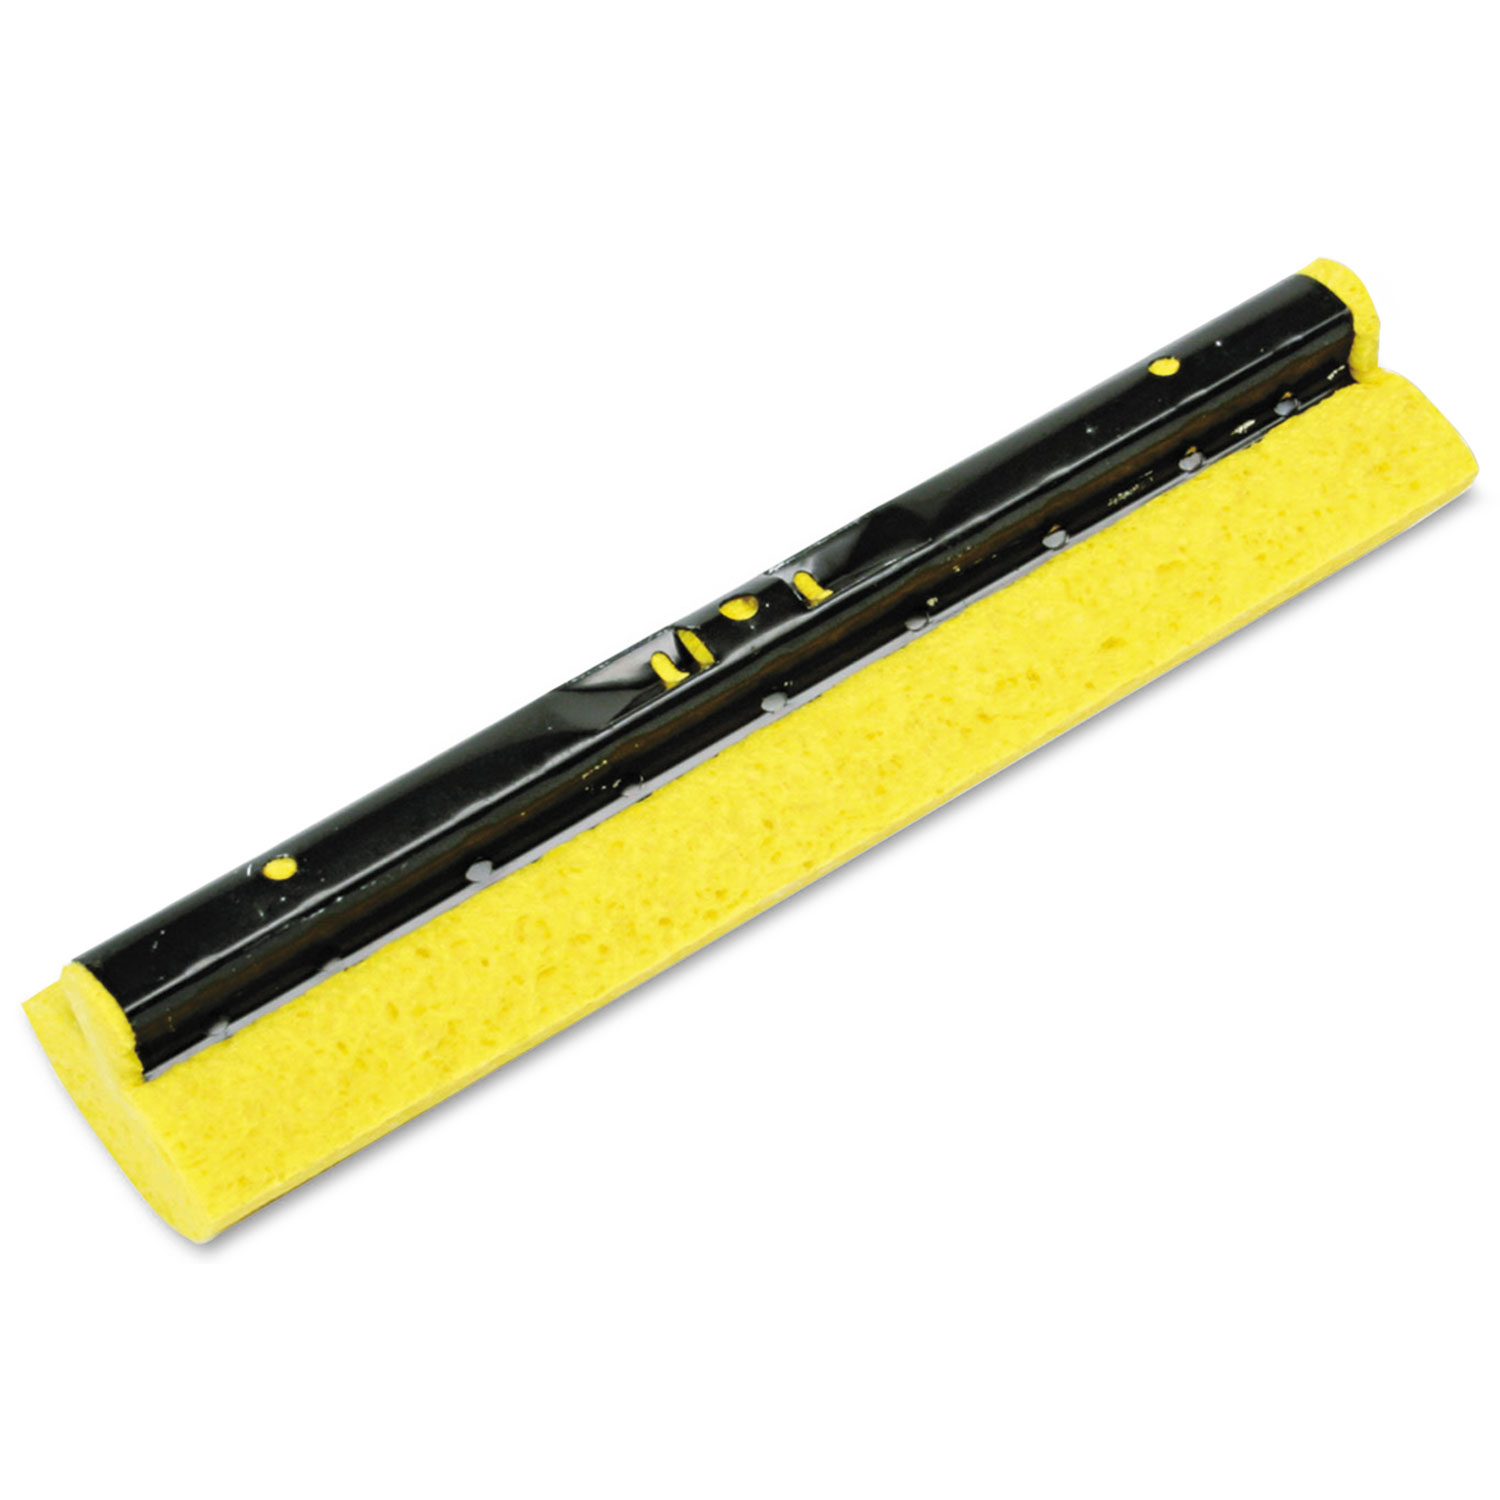  Rubbermaid Commercial FG643600YEL Mop Head Refill for Steel Roller, Sponge, 12 Wide, Yellow (RCP6436YEL) 